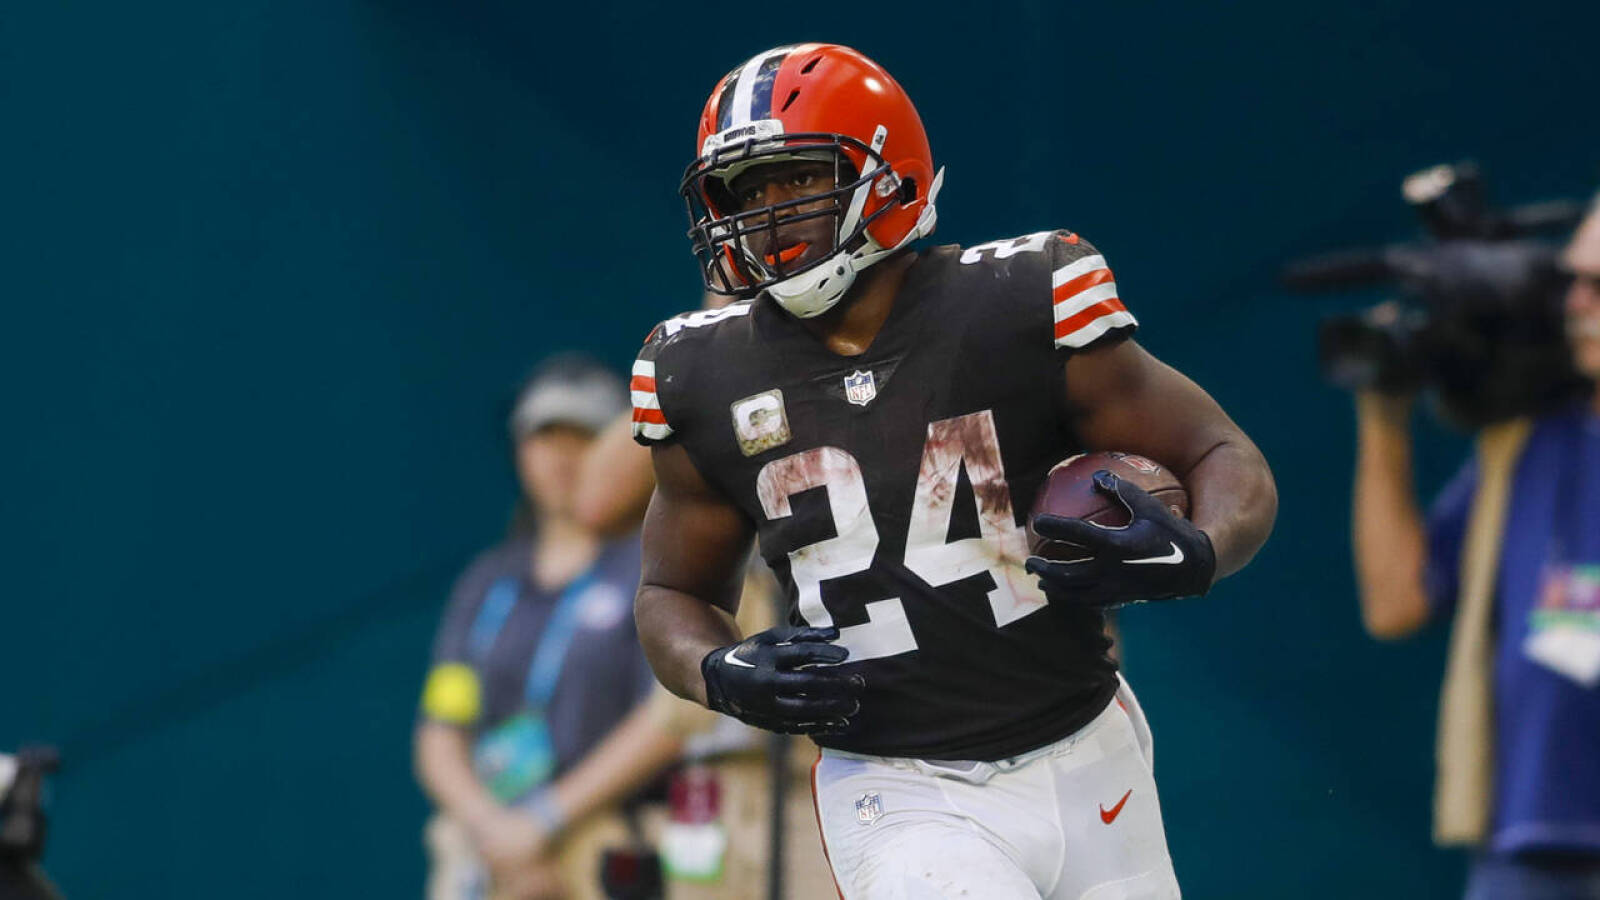 Cleveland Browns RB Nick Chubb undergoing knee surgery today